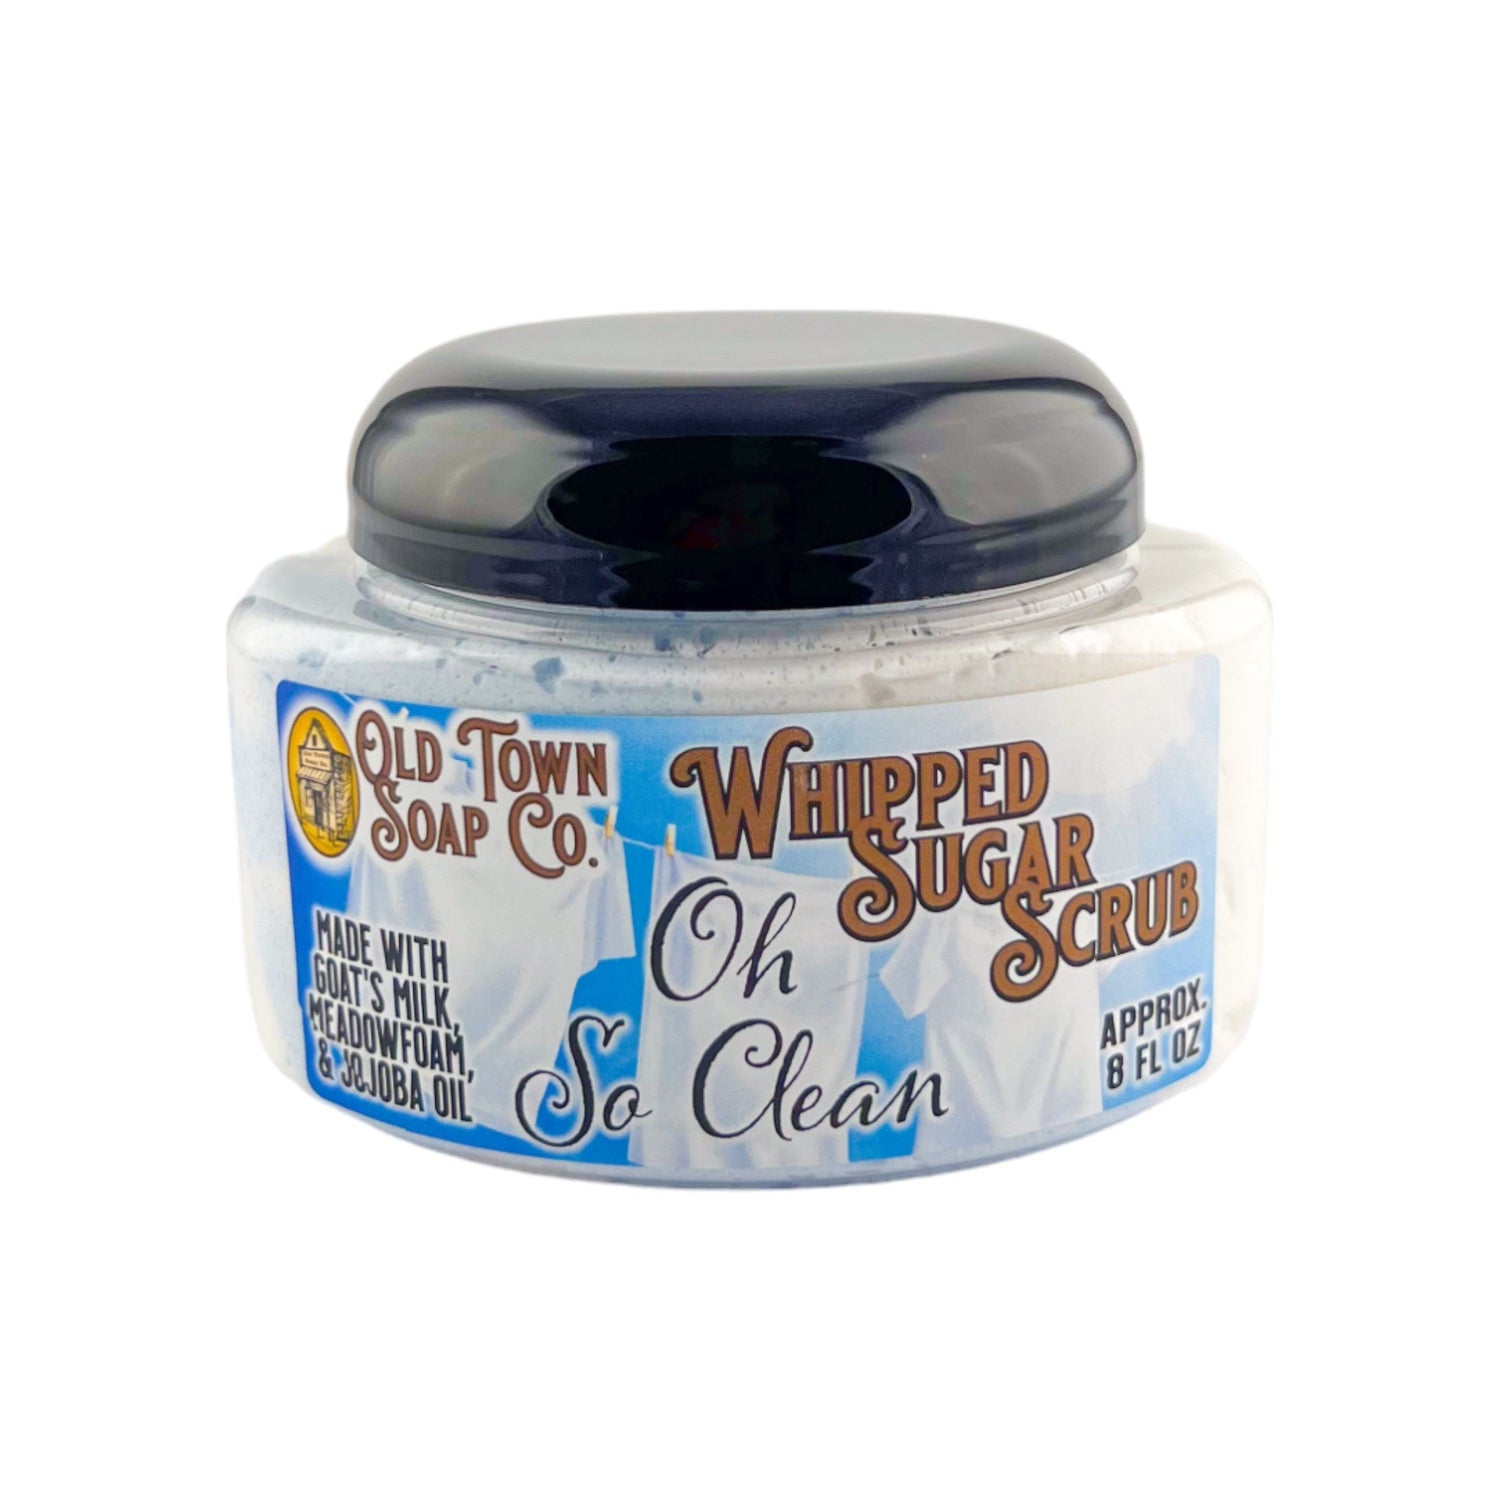 Oh So Clean -Whipped Sugar Scrub Soap - Old Town Soap Co.